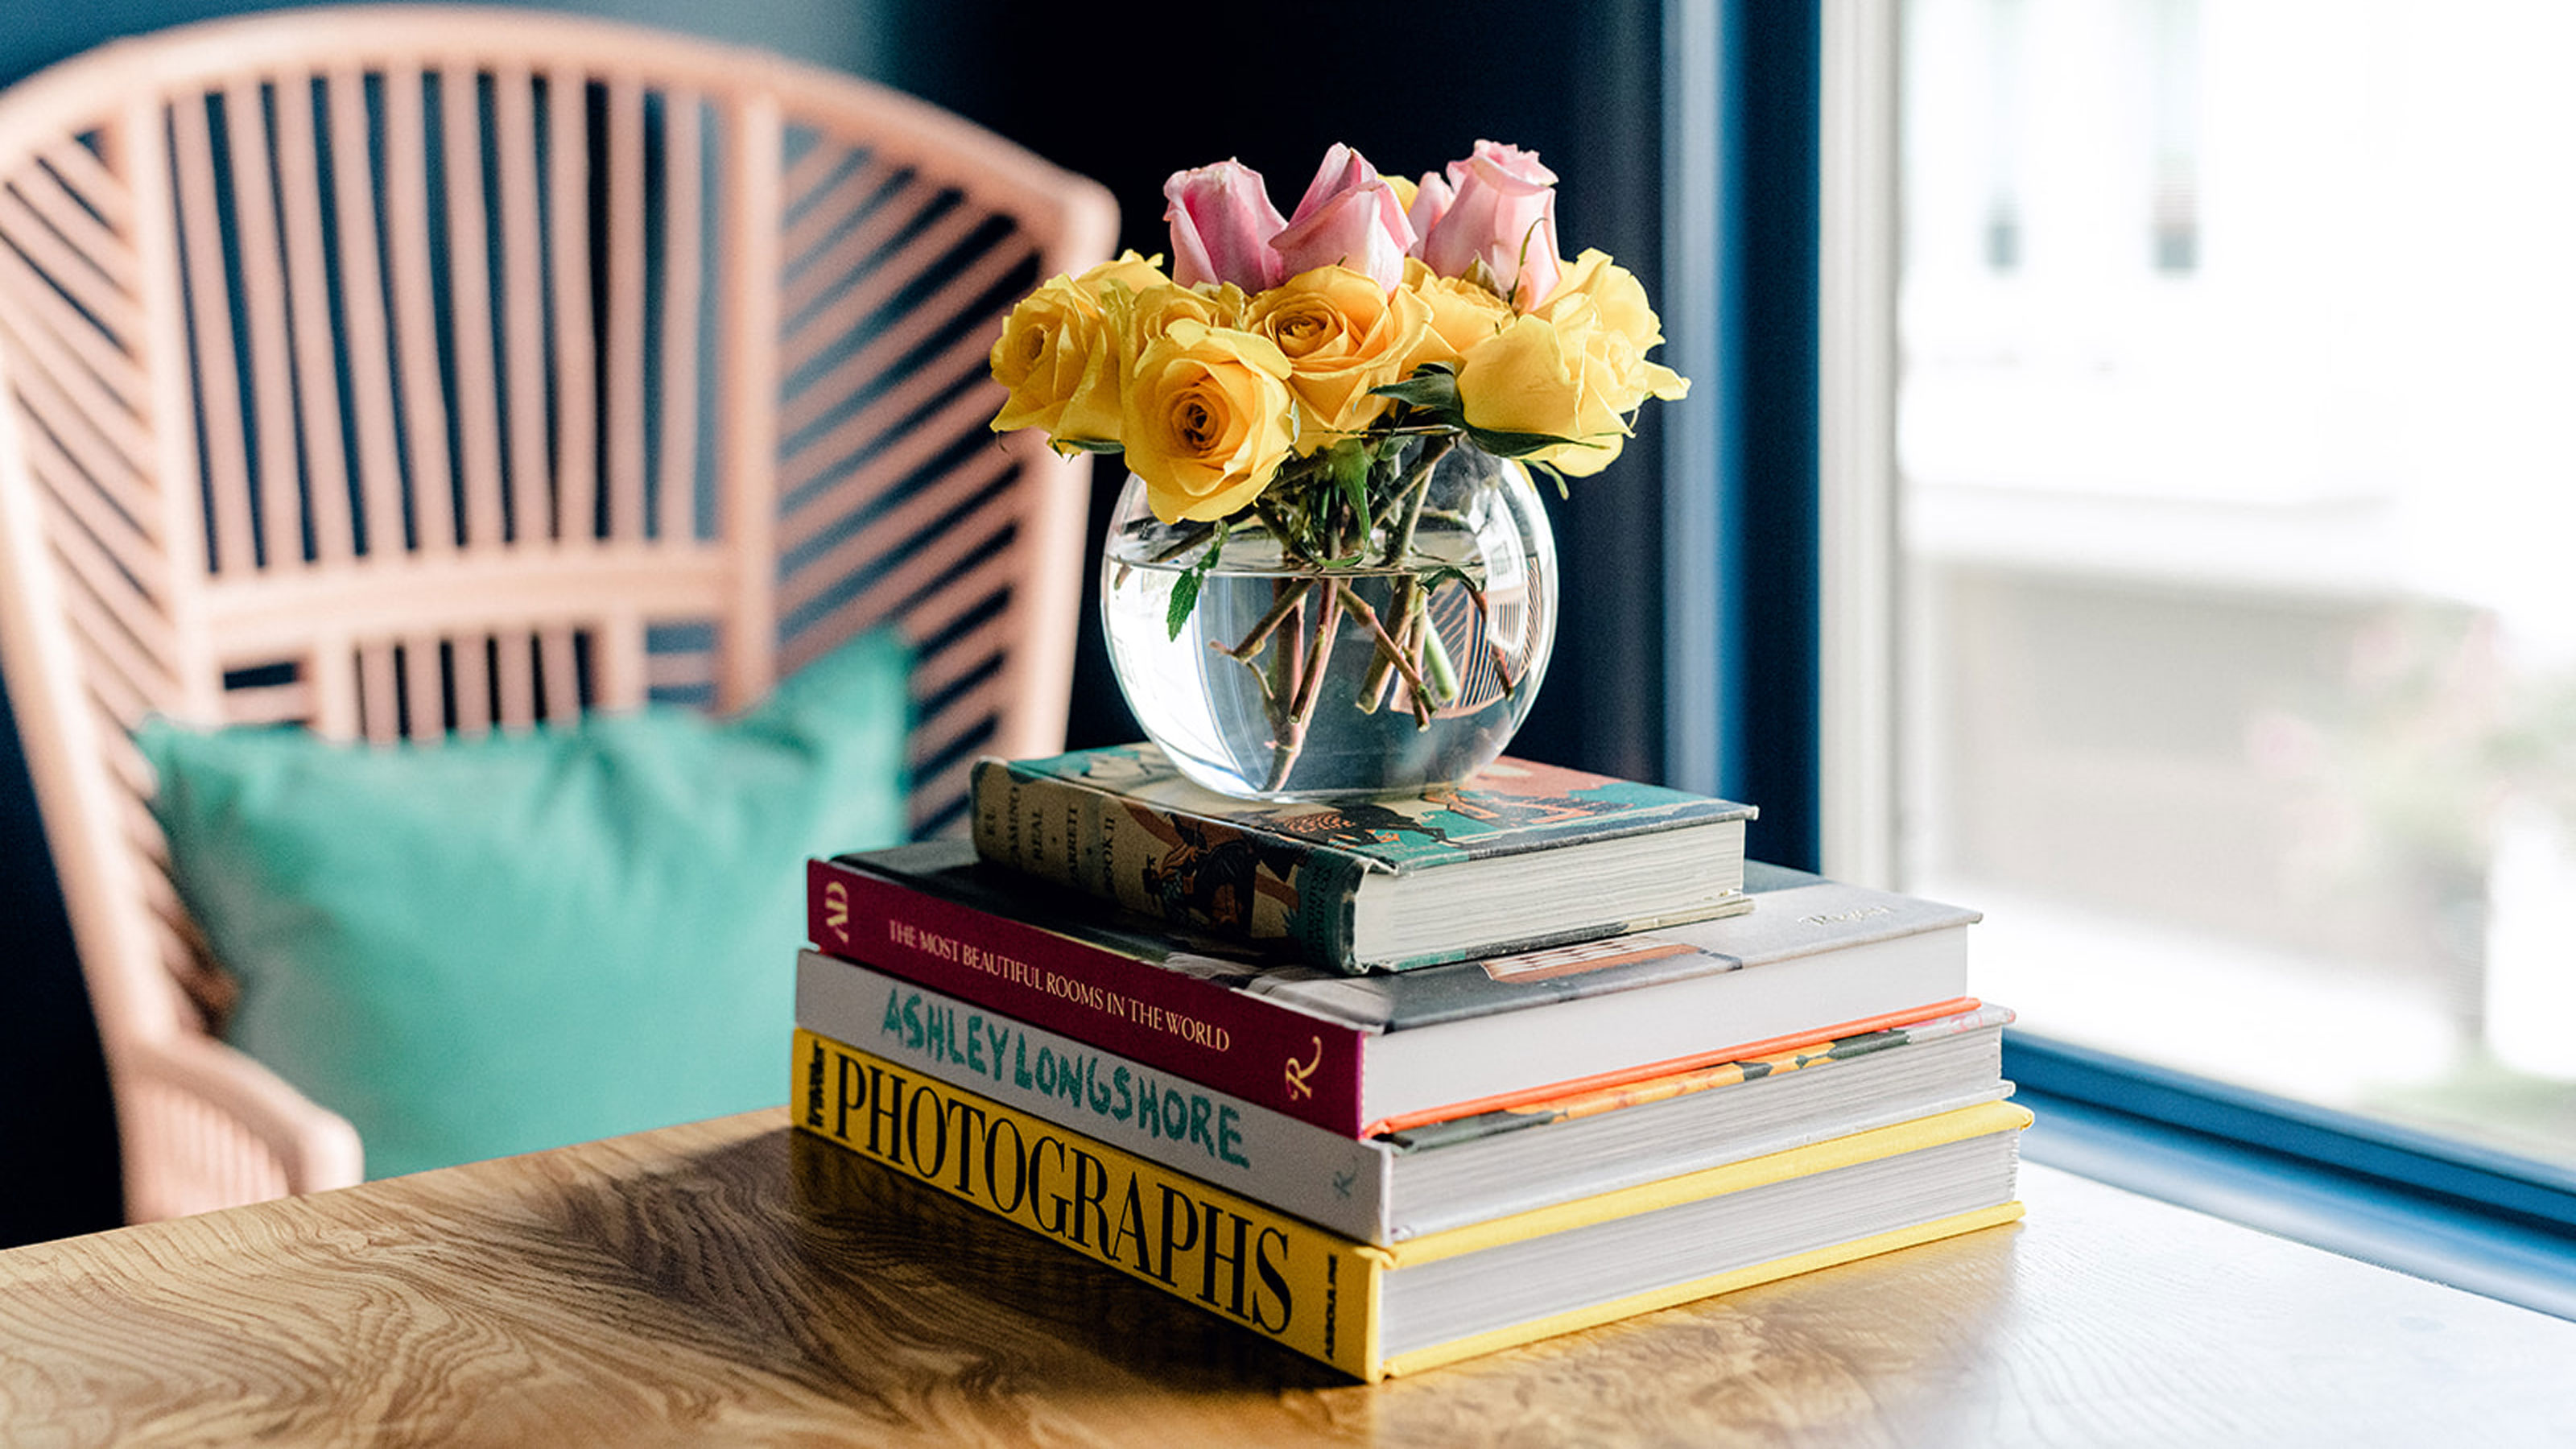 Colorful Styling Coffee Table Books, Accessories